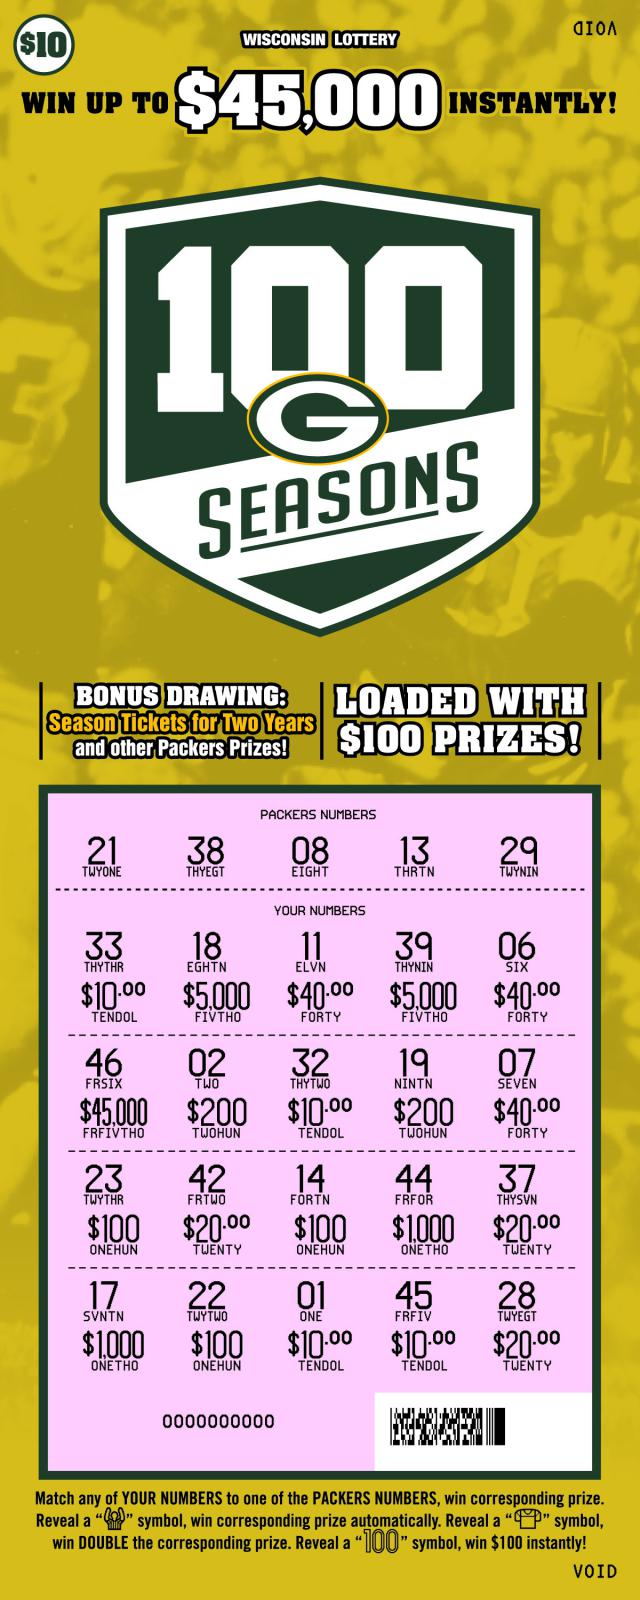 100 Seasons instant scratch ticket from Wisconsin Lottery - scratched